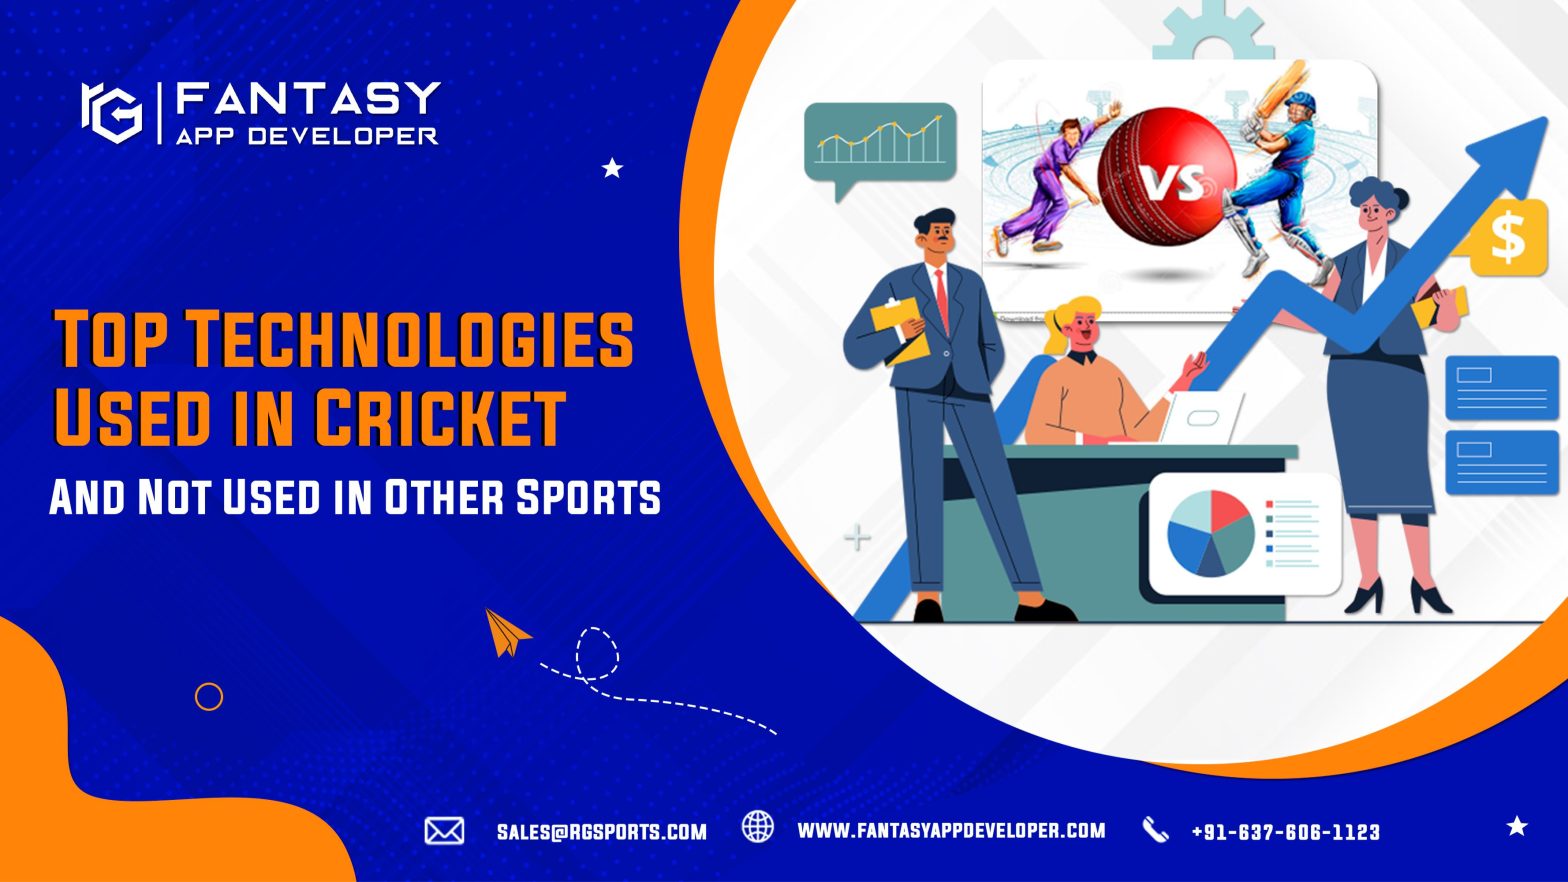 Top Technologies Used in Cricket and Not Used in Other Sports